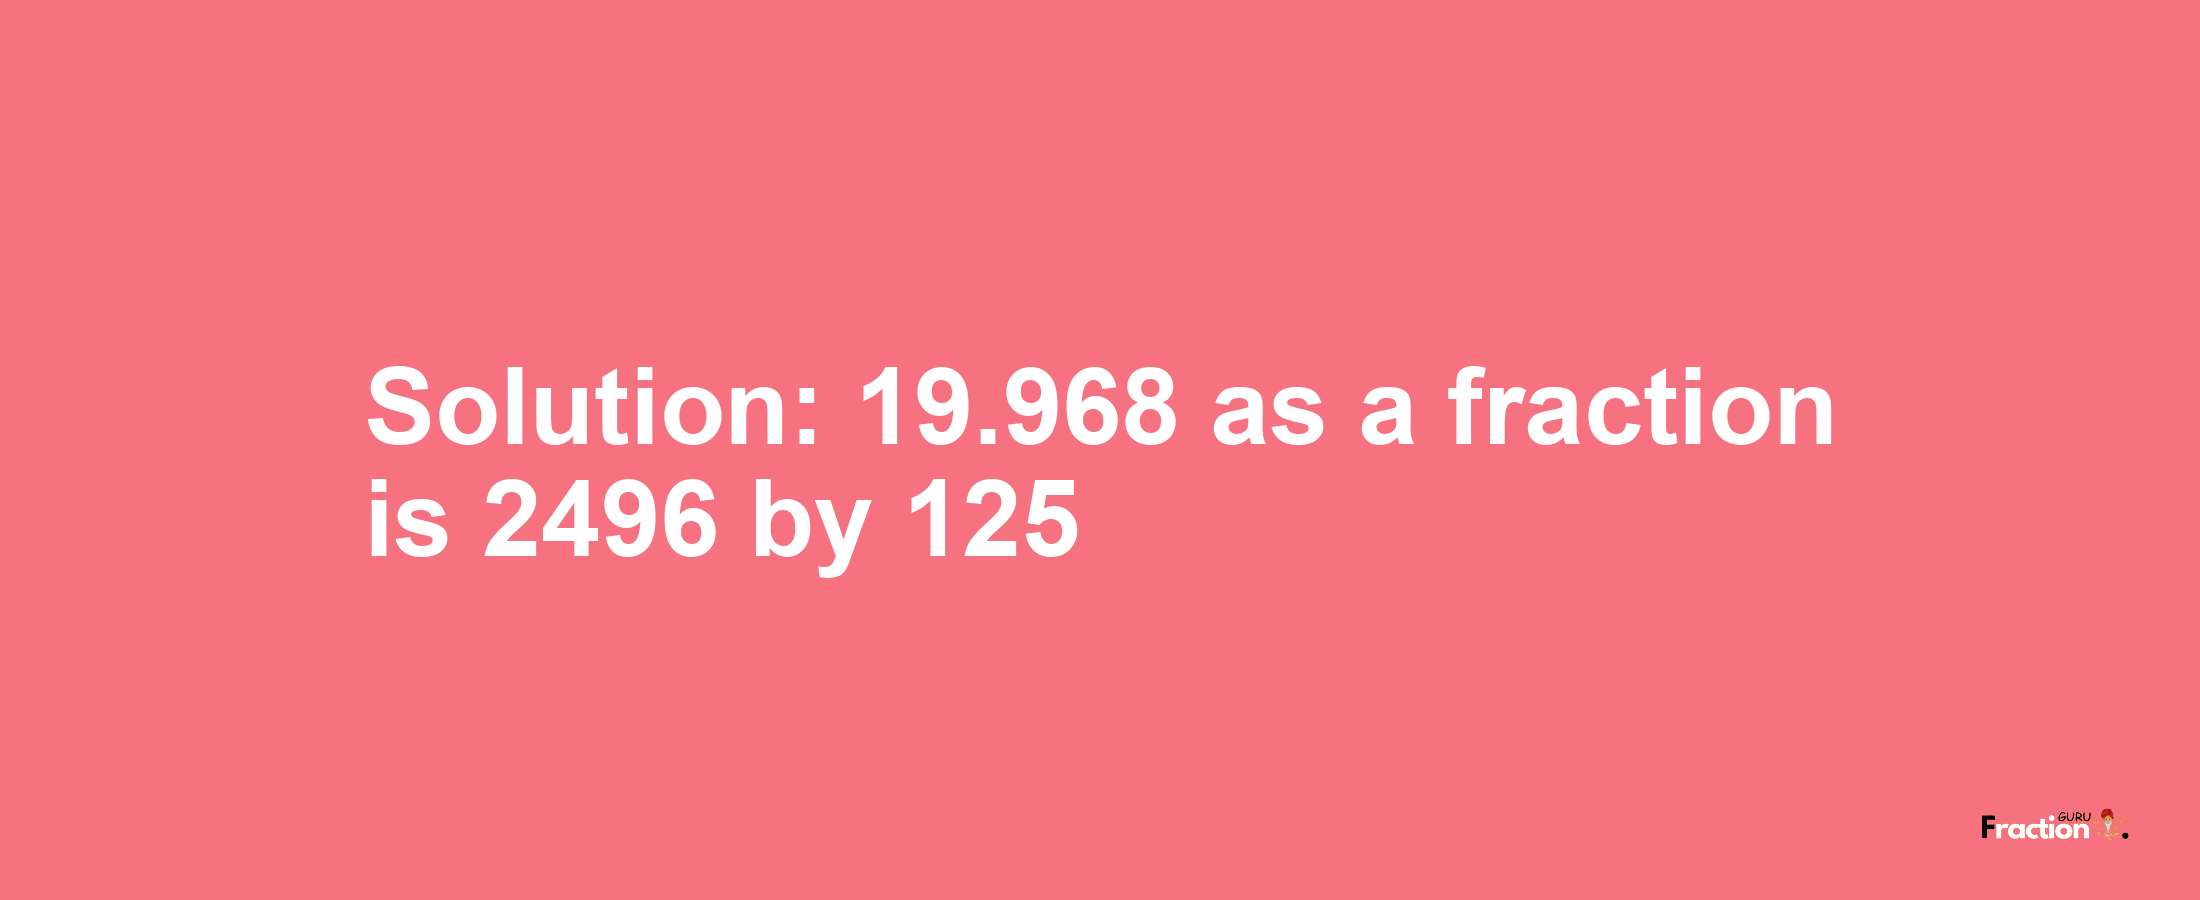 Solution:19.968 as a fraction is 2496/125